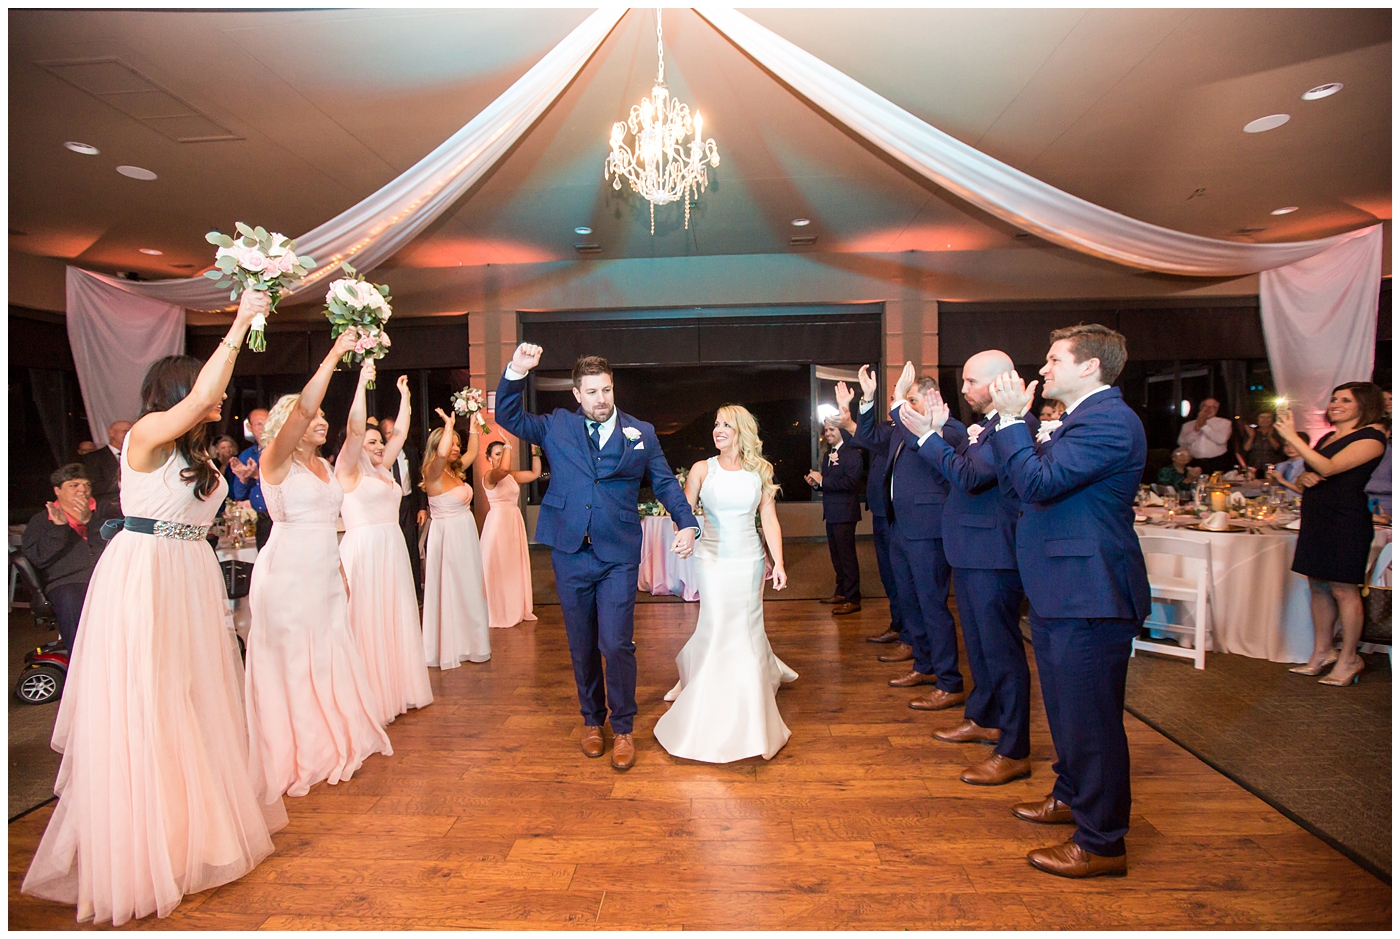 gorgeous bride with side swept hair in racerback pronovias dress and blush pink, white rose and eucalyptus greenery wedding bouquet with groom in navy suit and tie grand entrance at wedding reception in ballroom